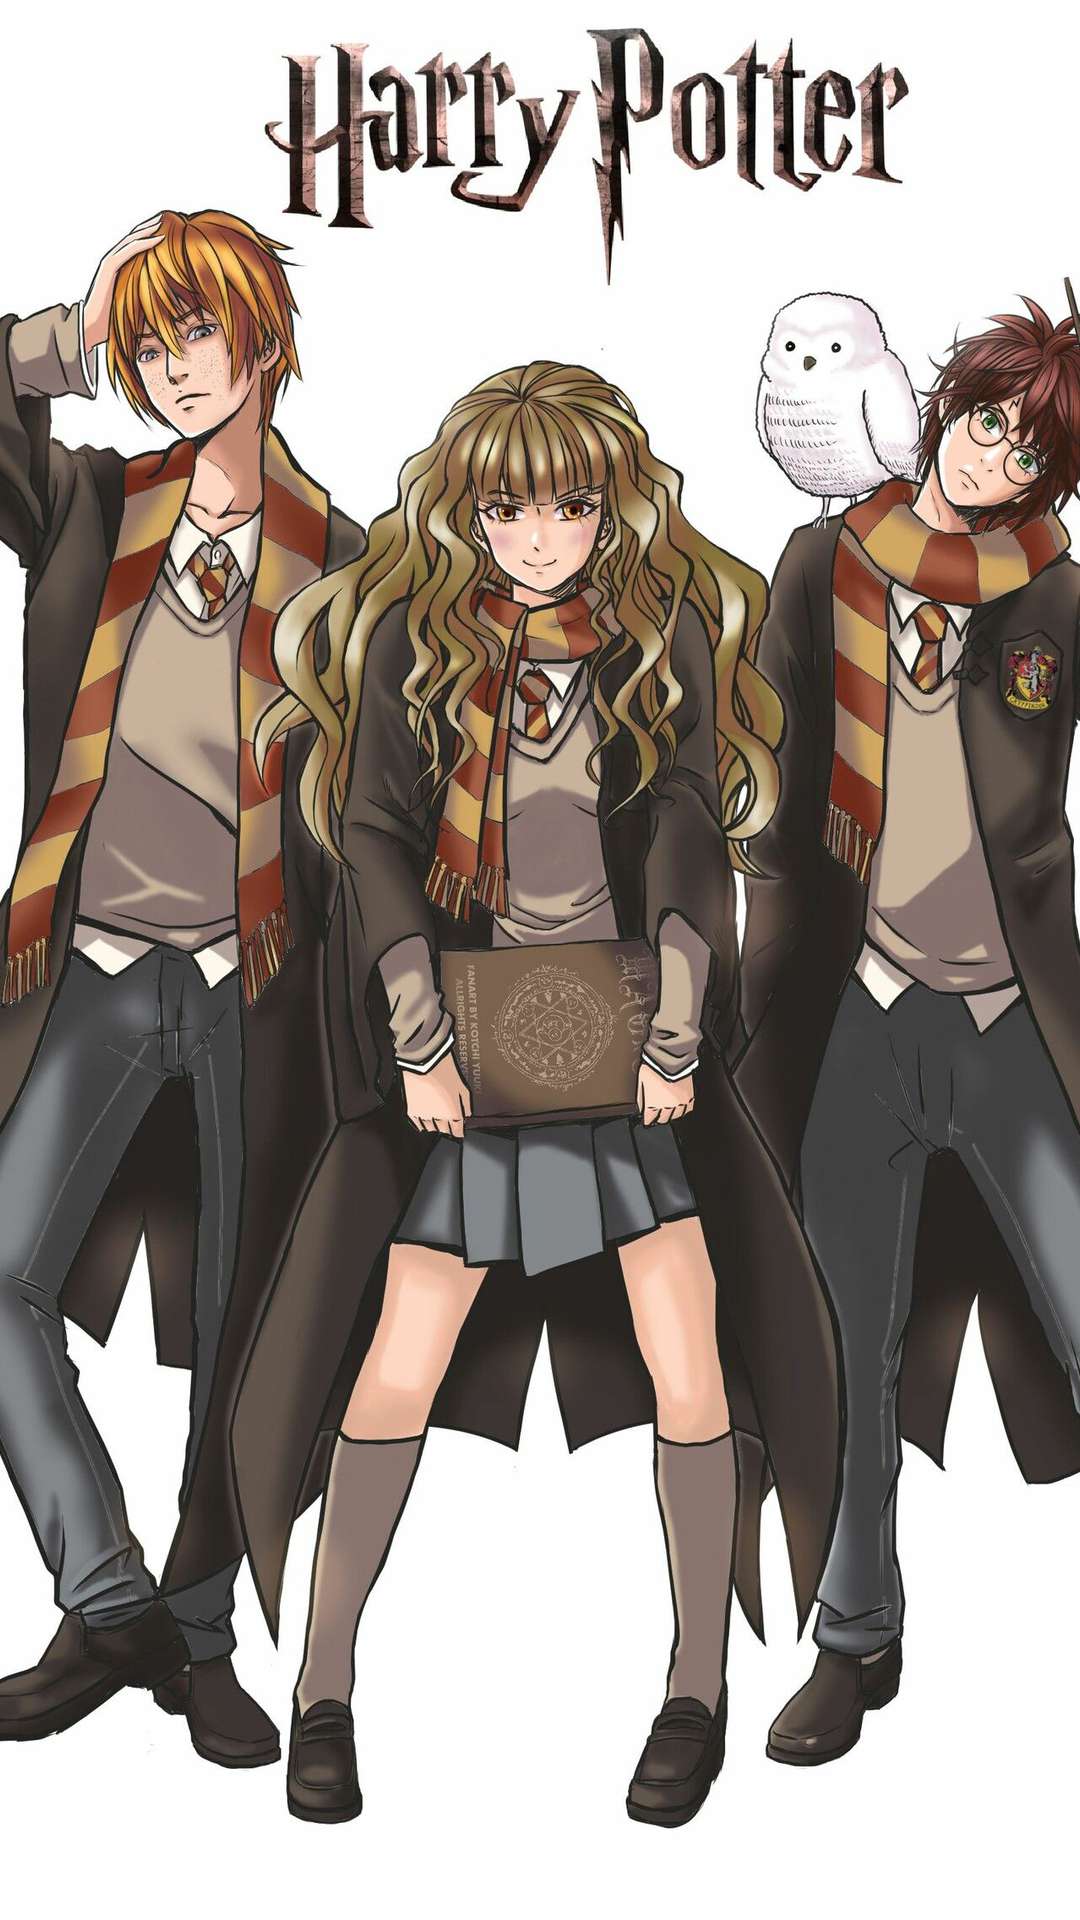 These Official Harry Potter Anime Characters Will Make You Squeal With Joy